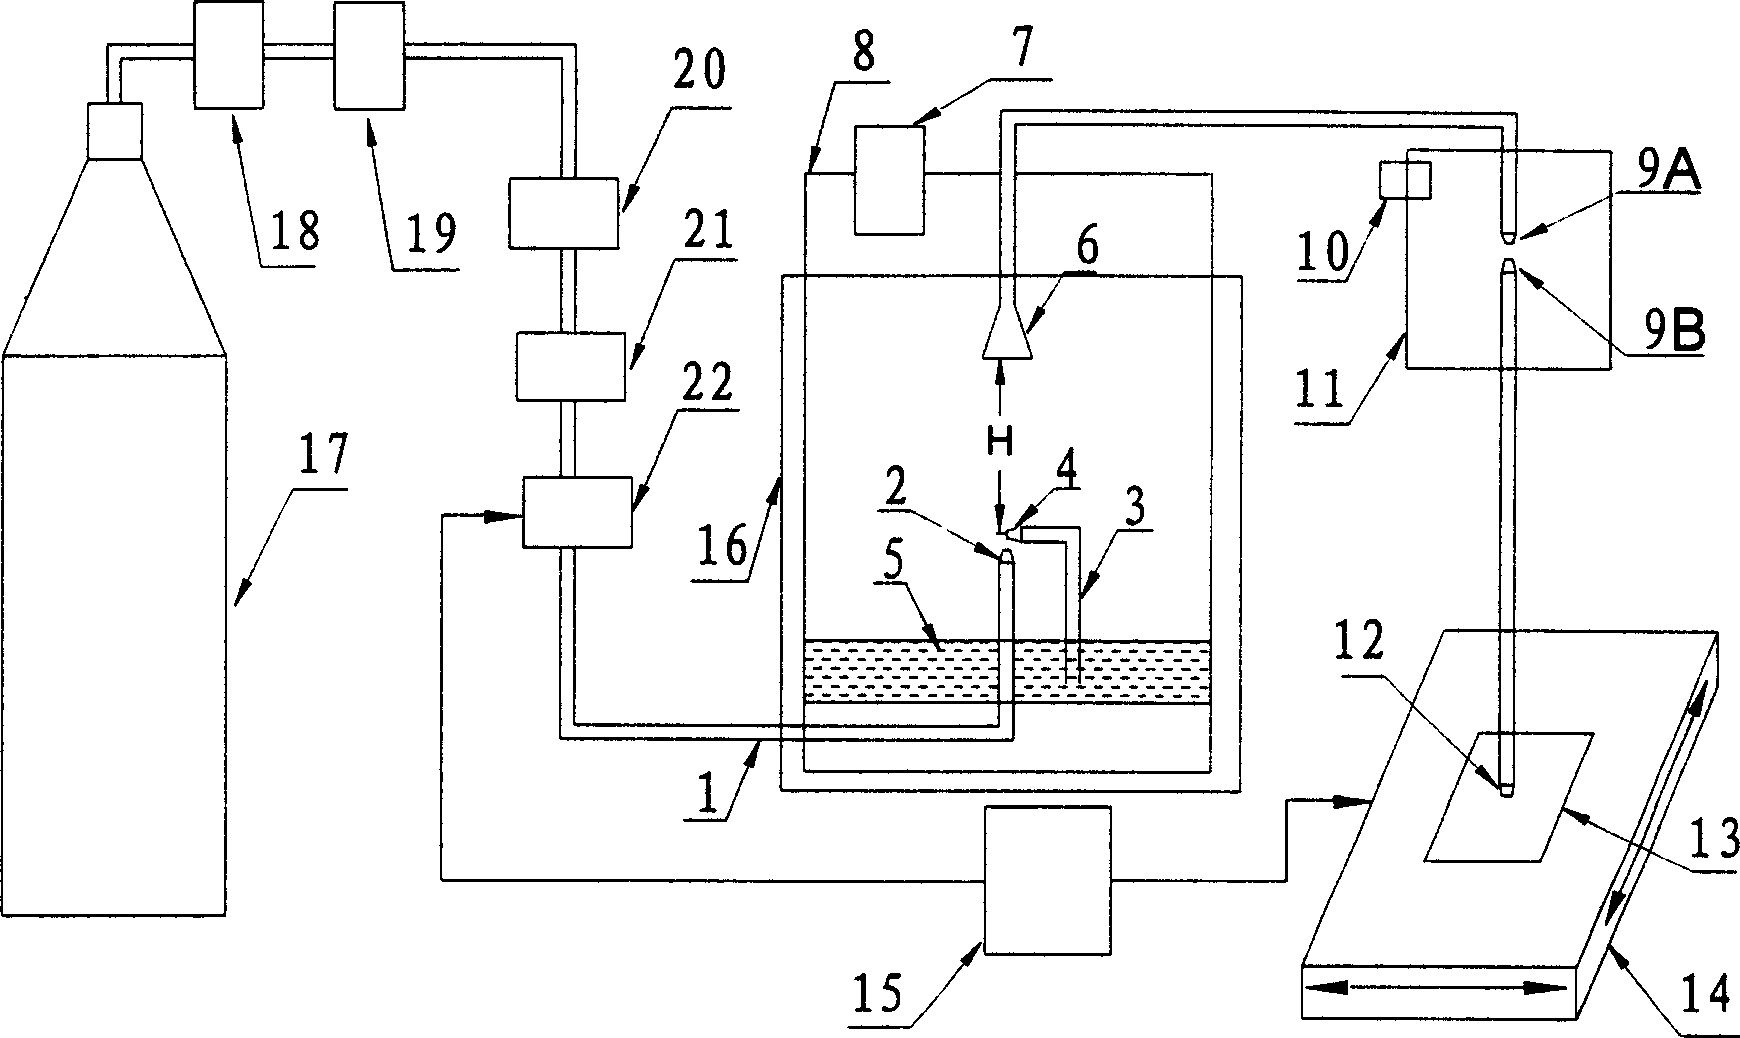 Electronic device for direct slurry atomization and deposition